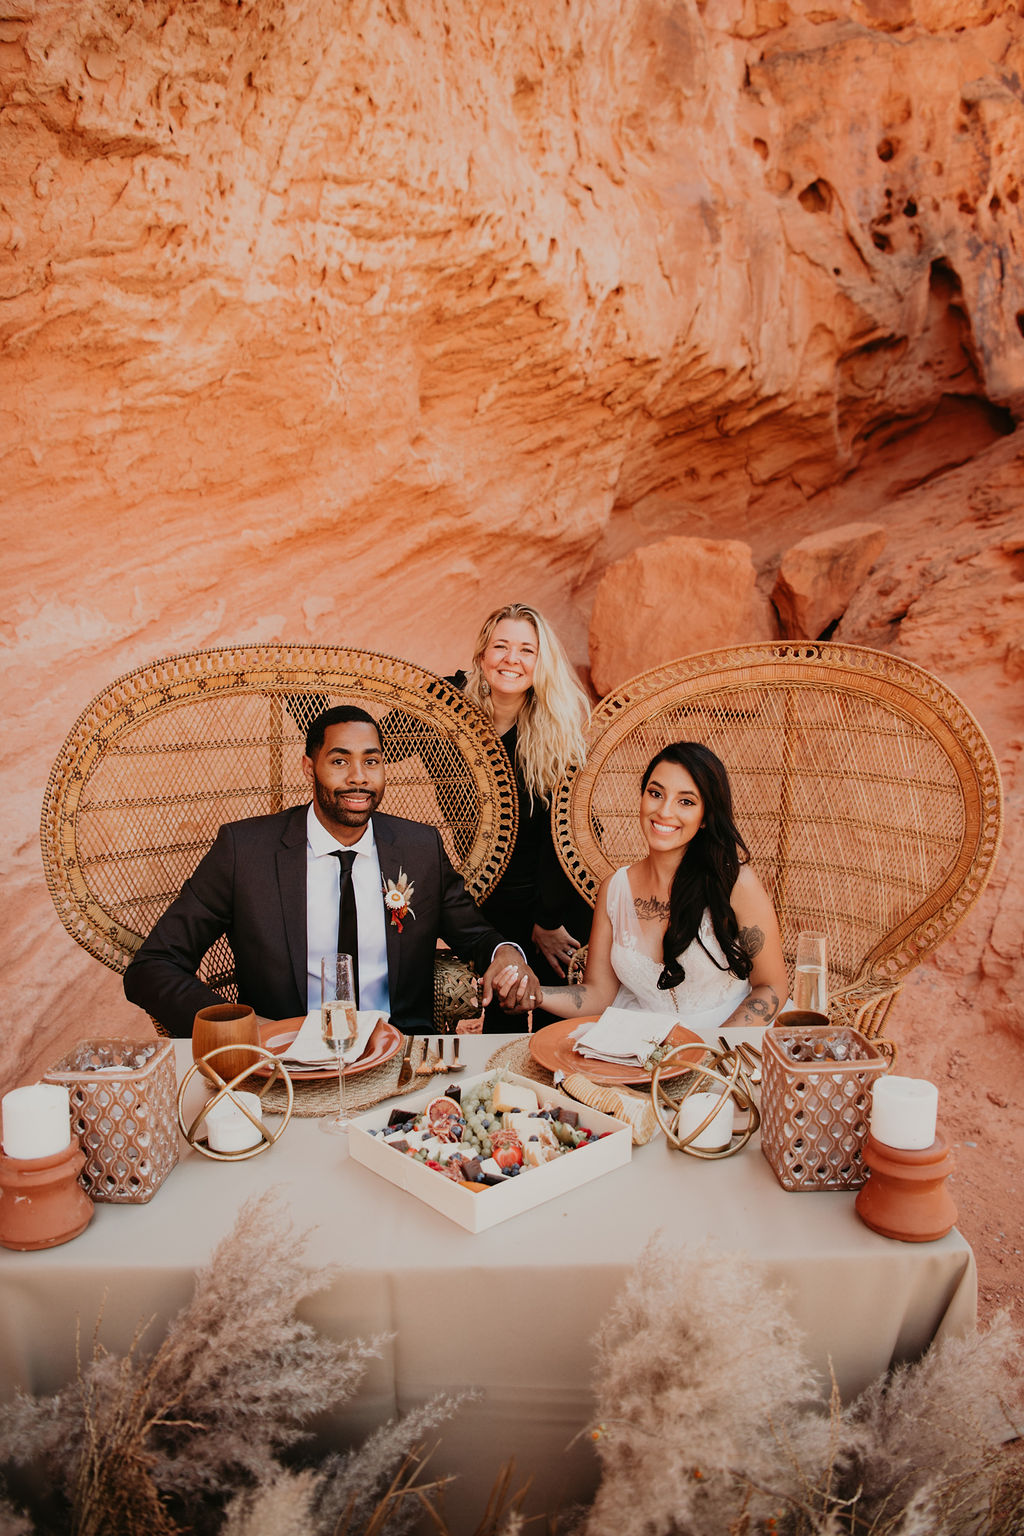 Las Vegas Wedding Planner with Couple at Designed White, Nude, Amber, & Beige Sweetheart Table at Valley of Fire 